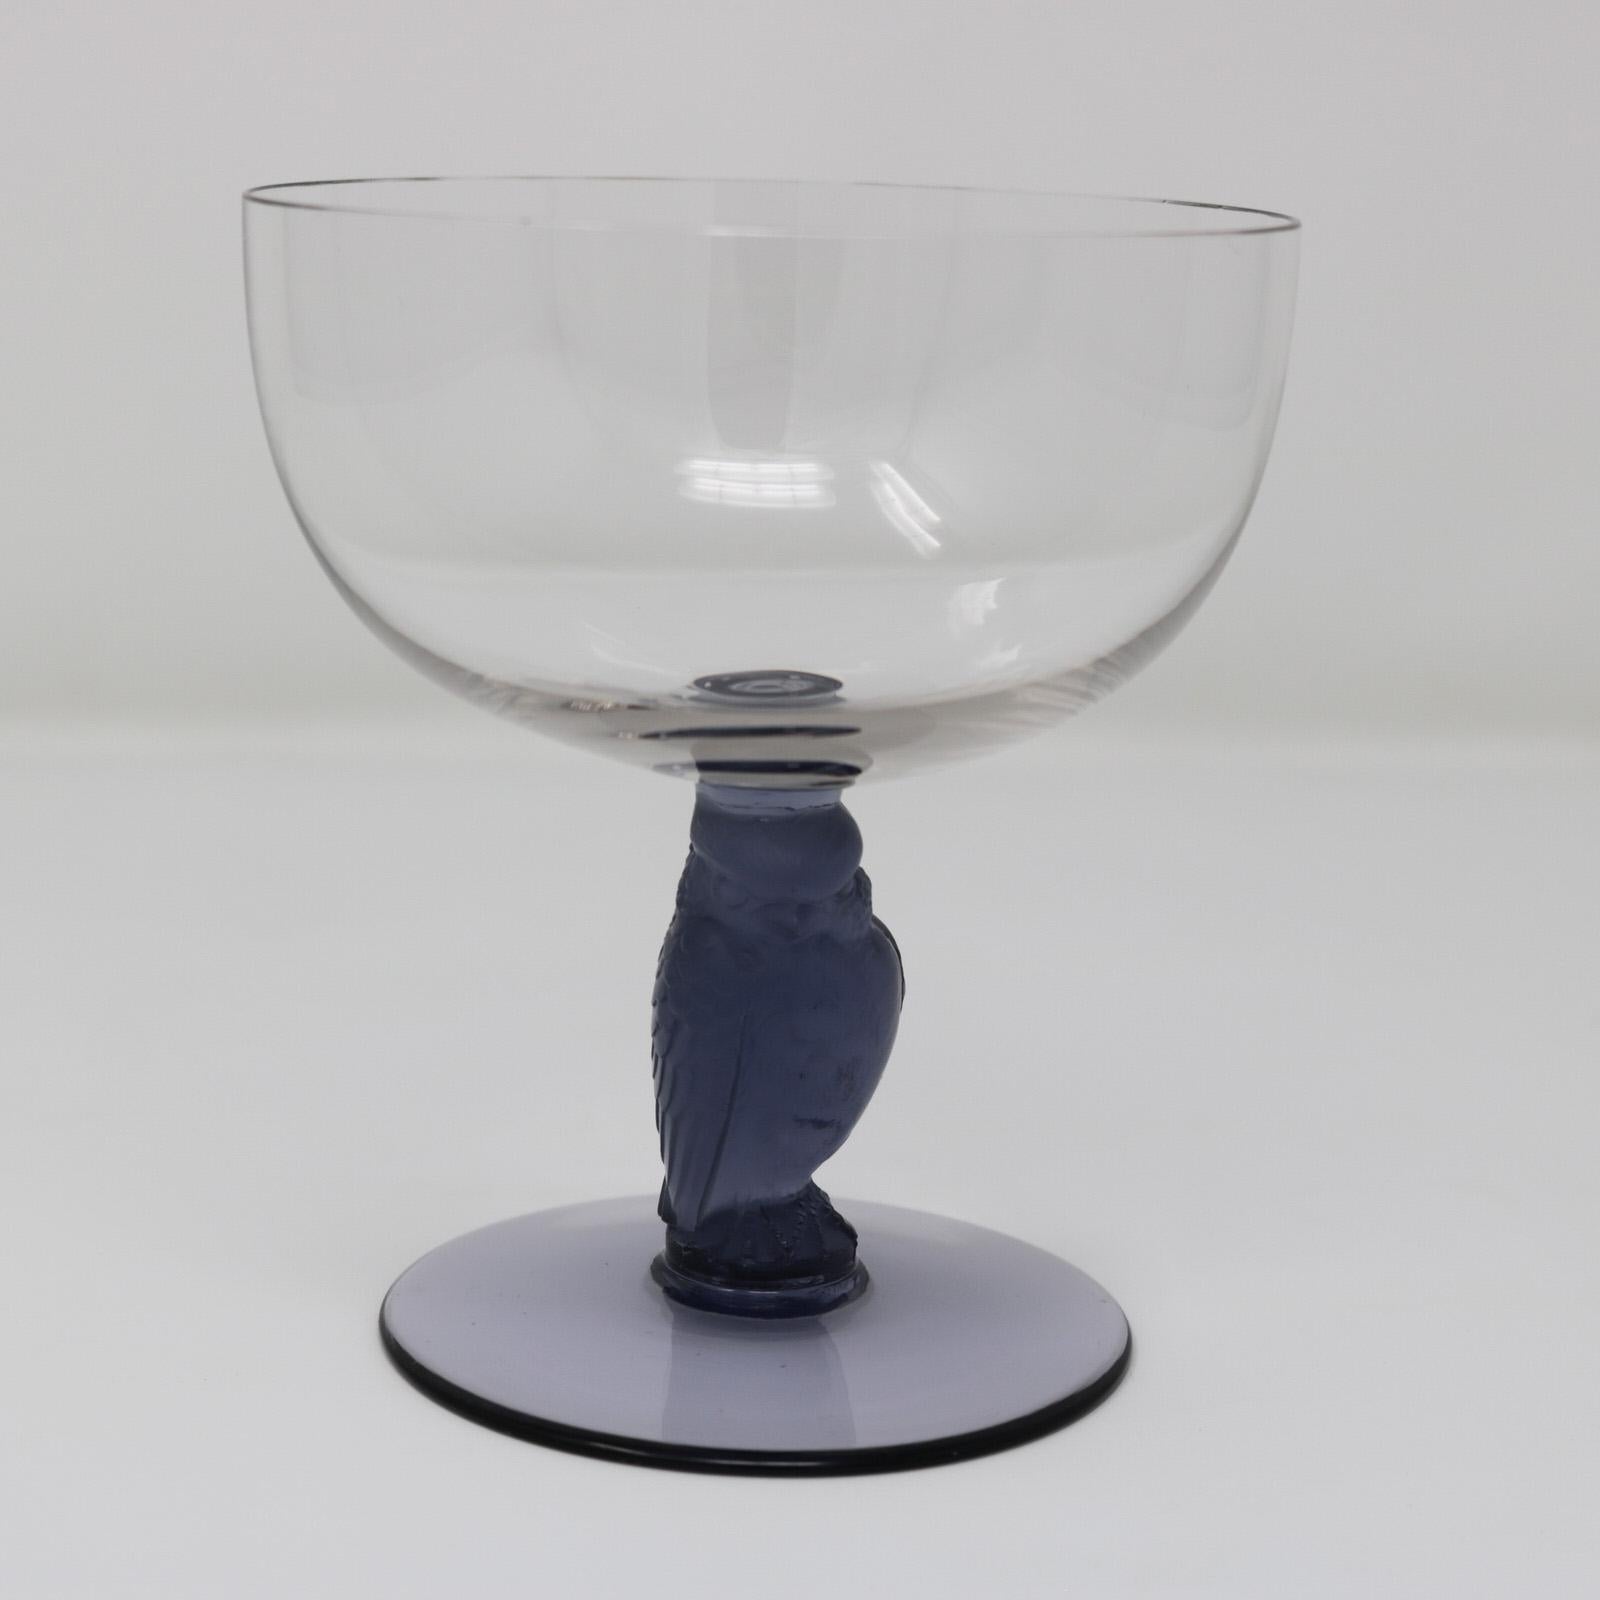 Rene Lalique glass 'Rapace' champagne drinking glass. Clear glass bowl and foot. Blue glass stem modelled in the form of a raptor bird (by direct translation of rapace). Engraved makers mark, 'R Lalique France'. Book reference: Marcilhac page 805,